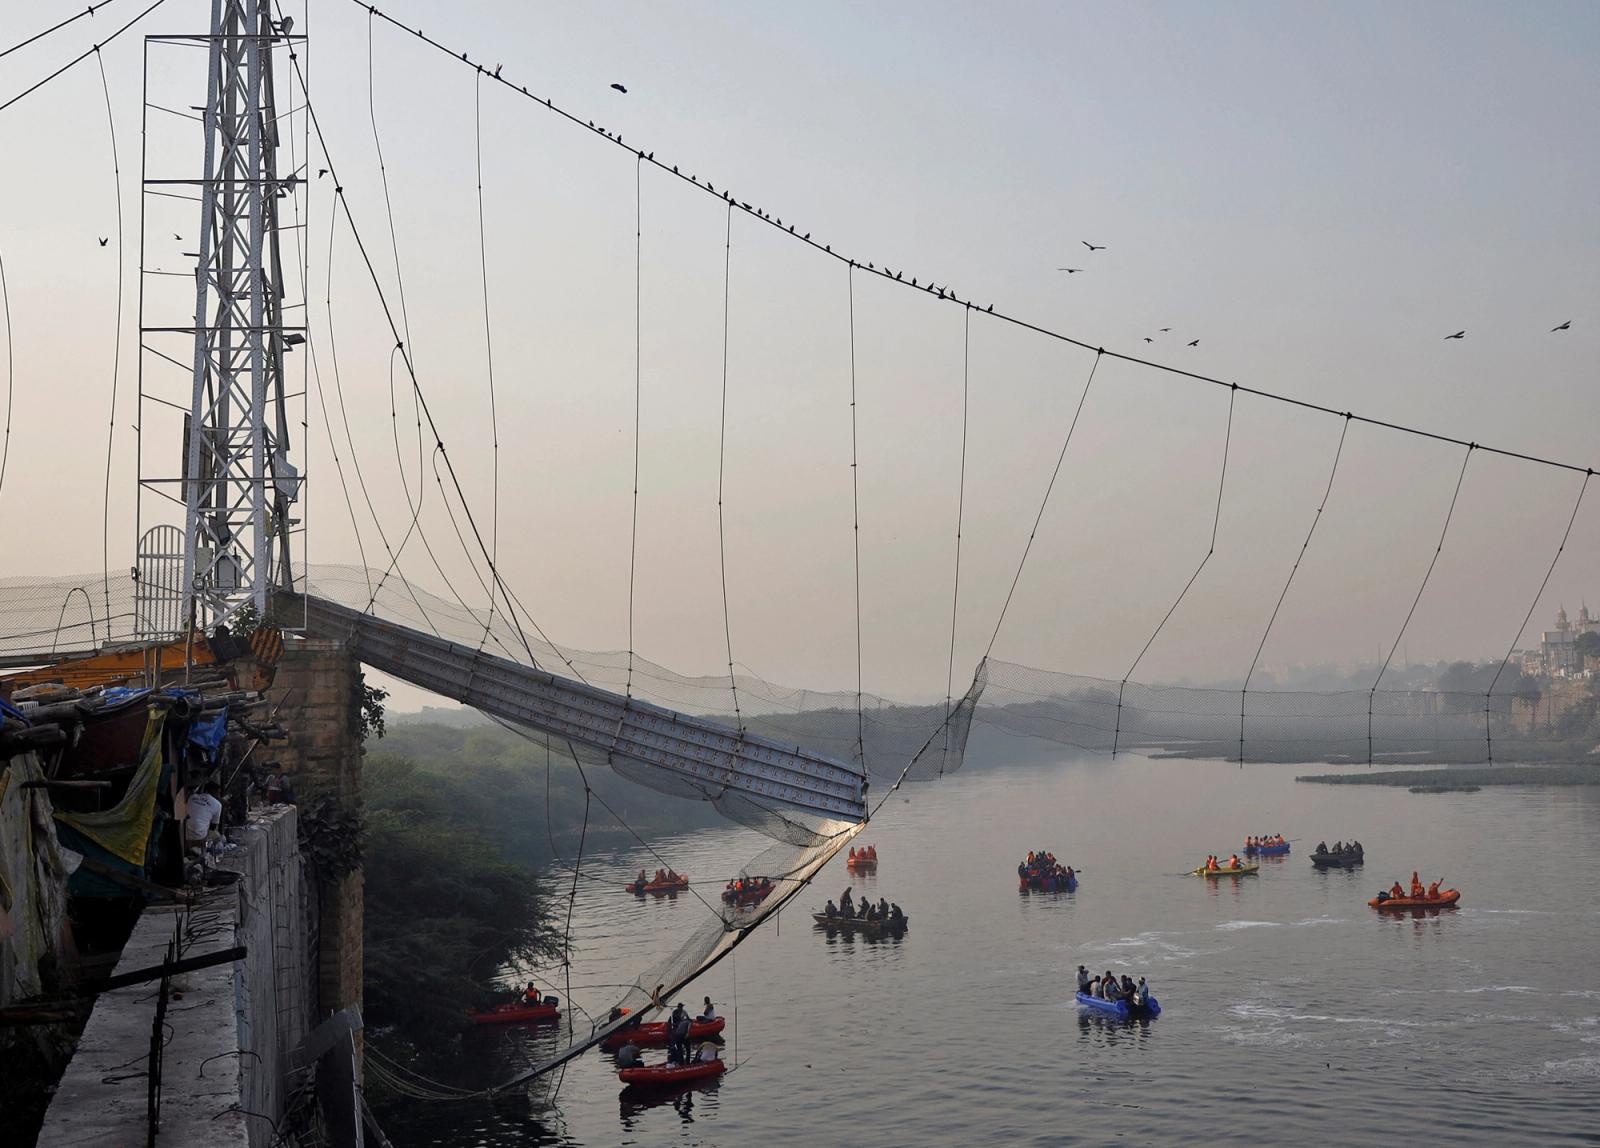 Rescuers search for survivors after a suspension bridge collapsed in Morbi town in the western state of Gujarat, India, October 31, 2022.